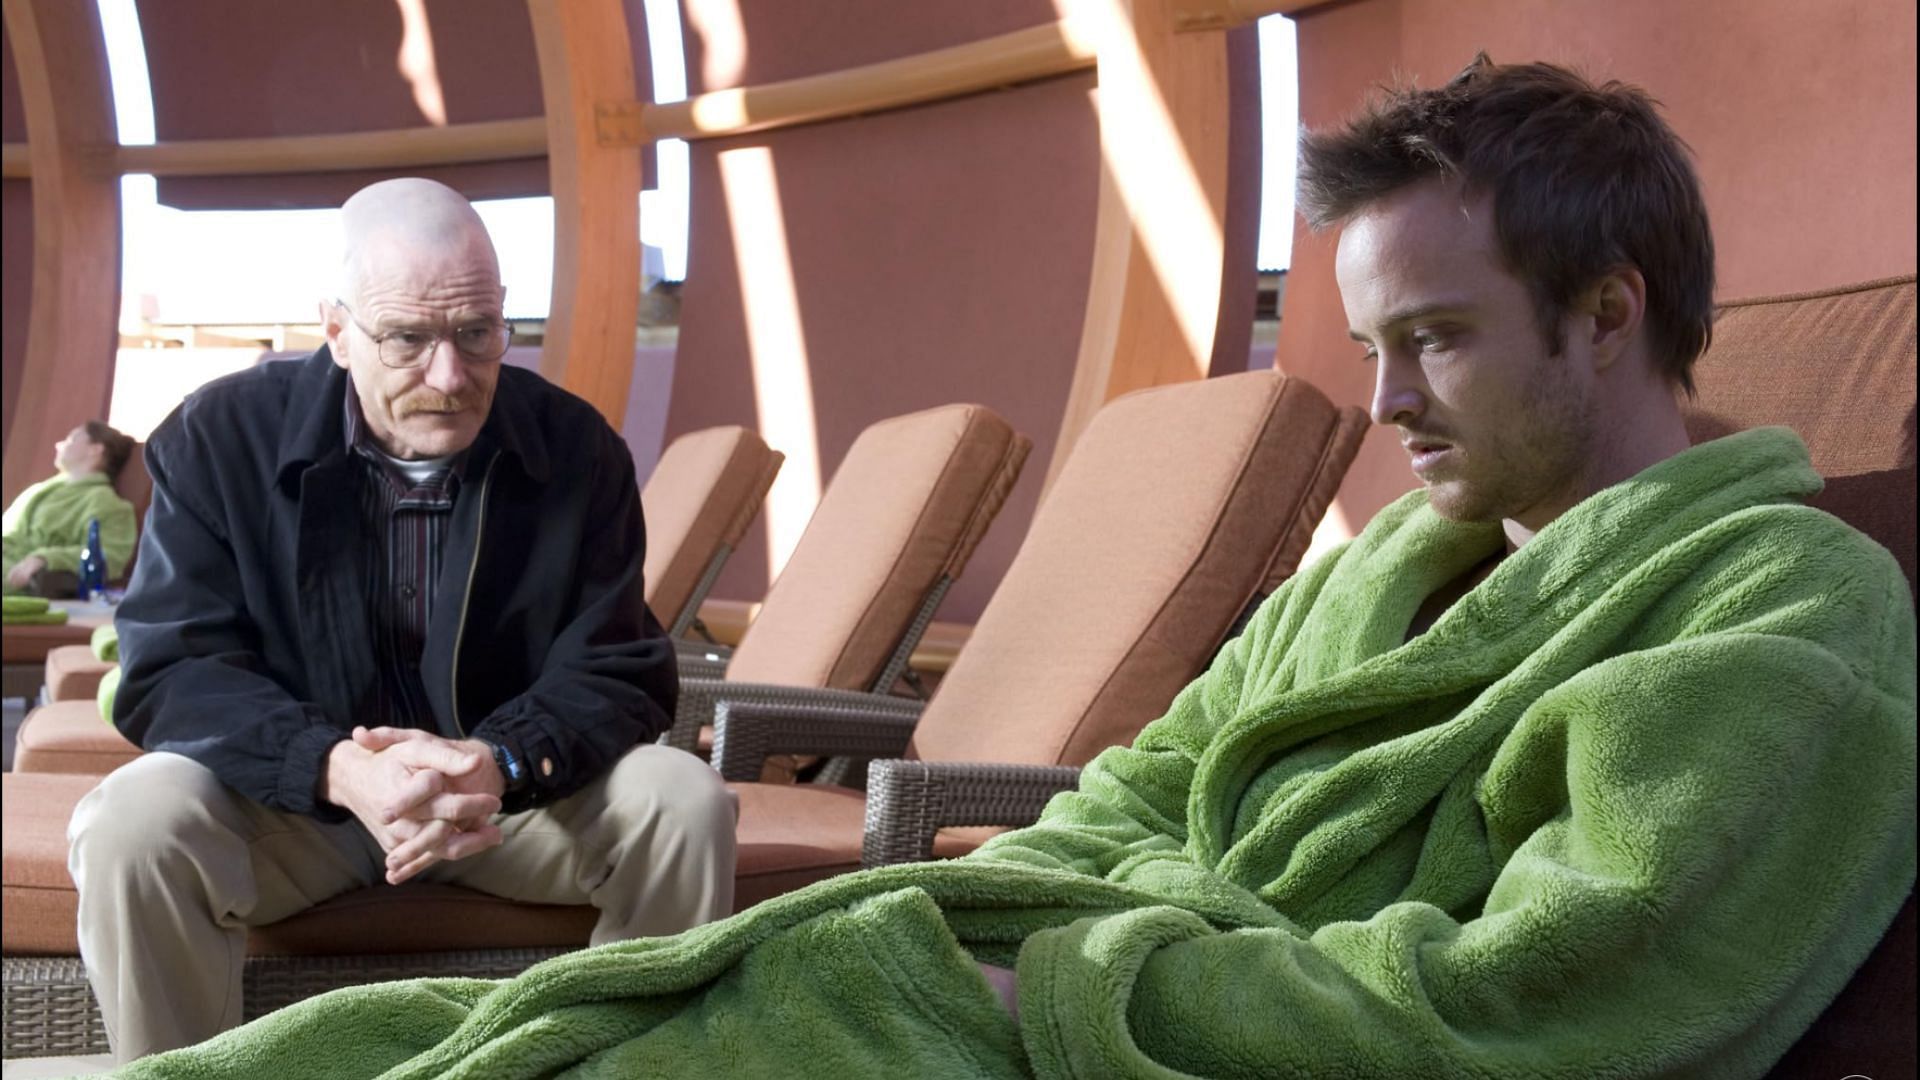 Bryan Cranston and Aaron Paul continue to be close friends (Image via IMDB and AMC)